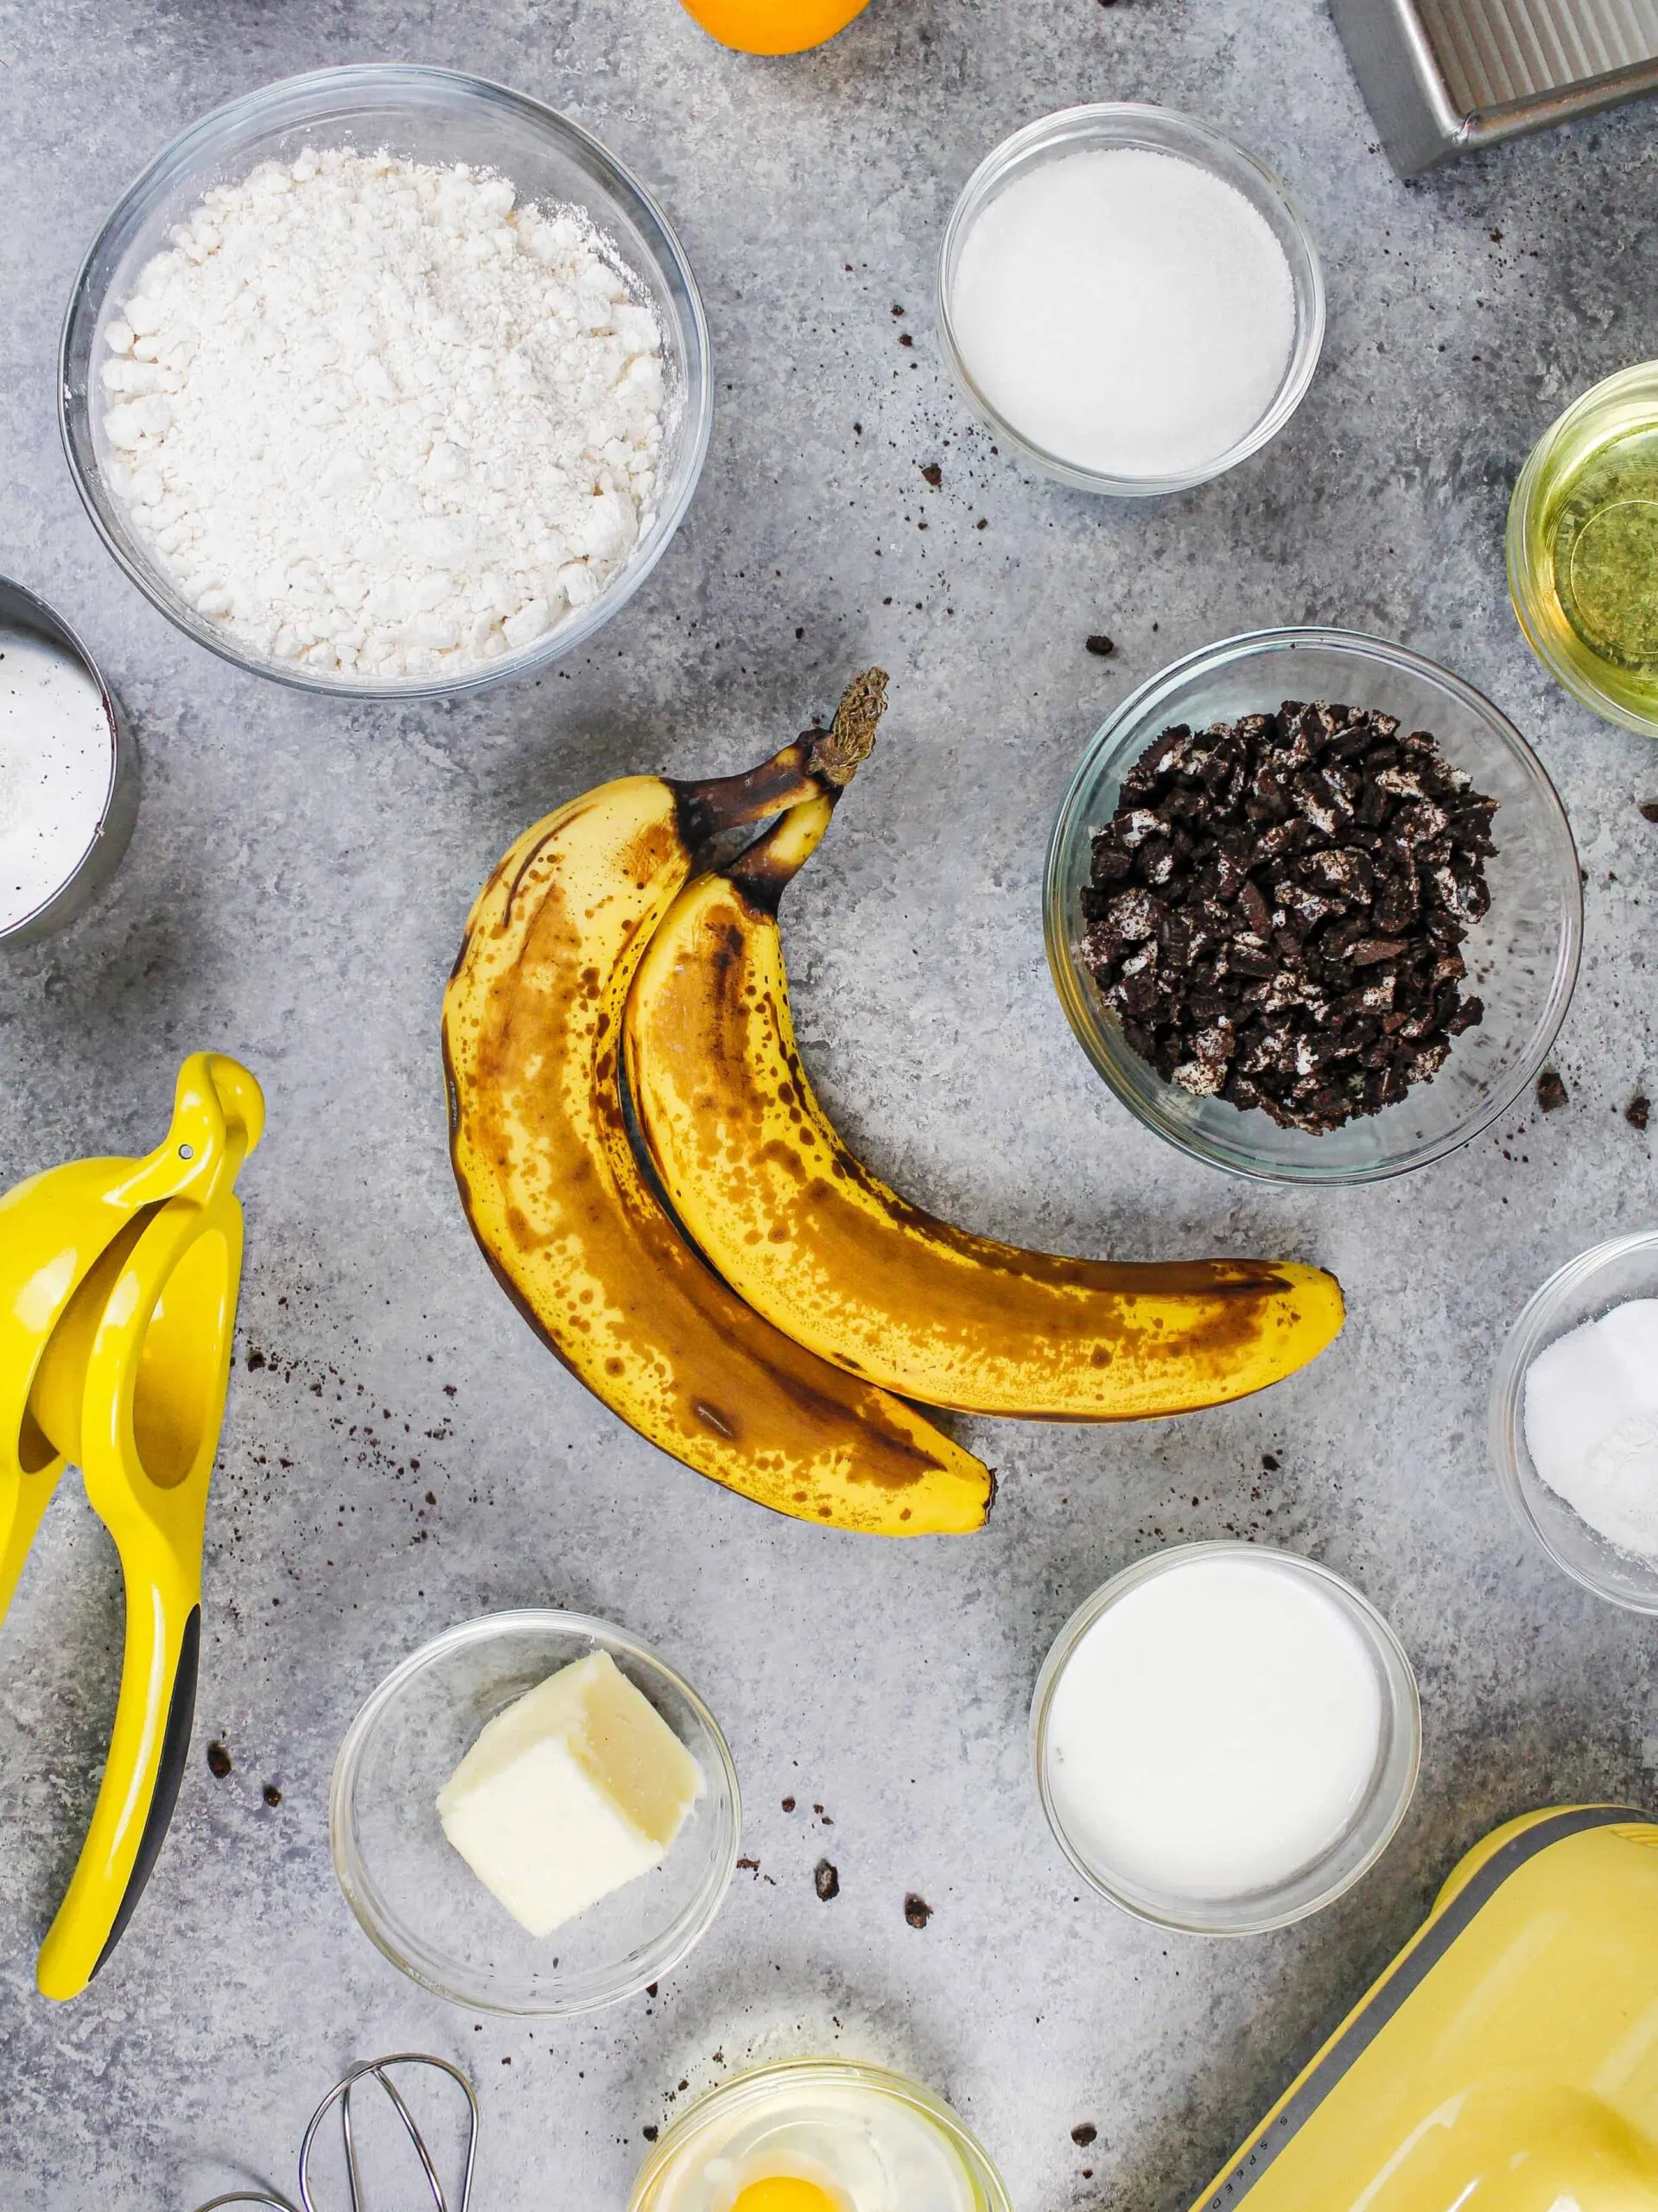 ingredients laid out to make oreo banana bread